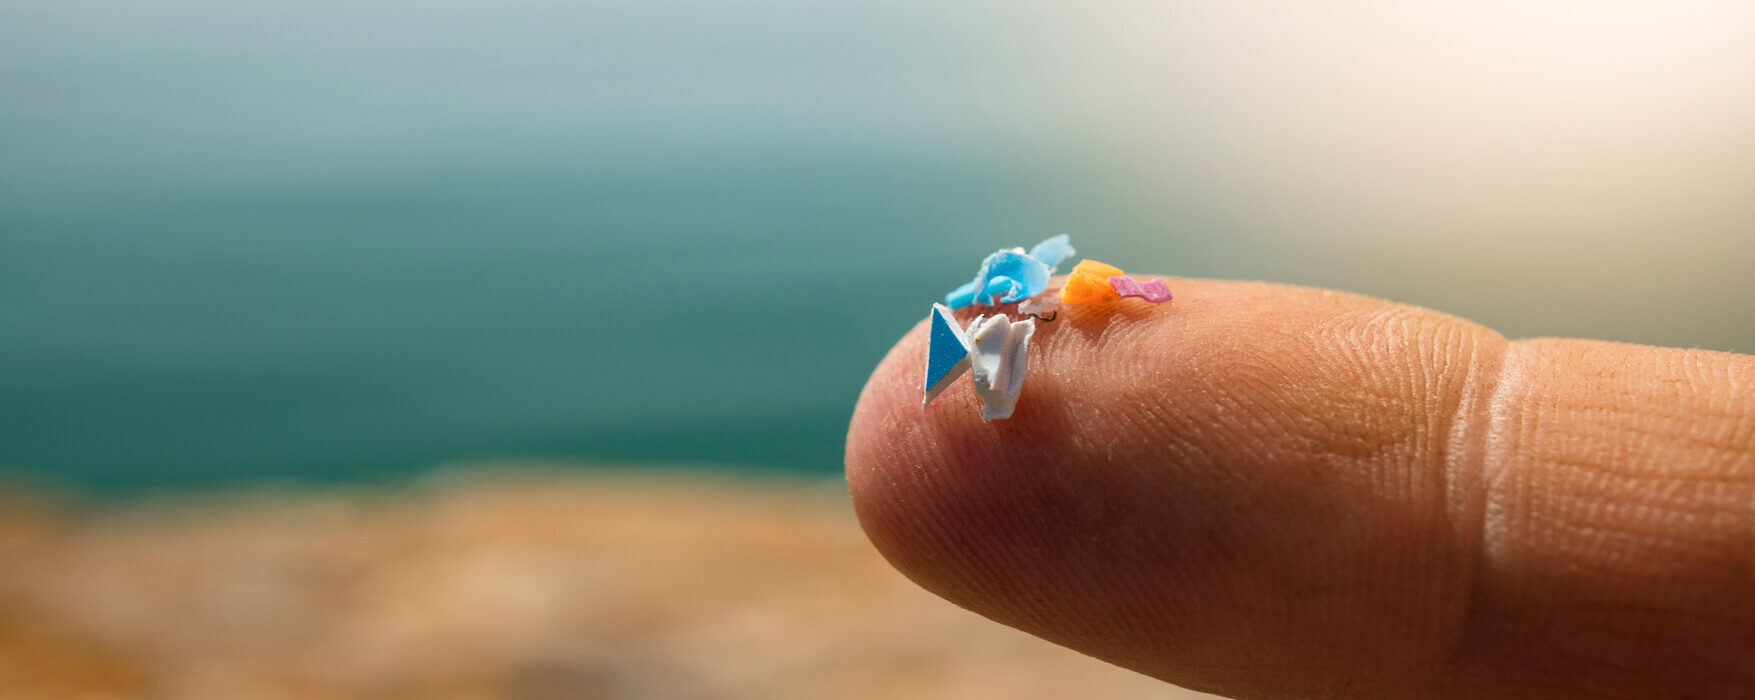 macro-shot-microplastics-human-fingers-concept-water-pollution-with-microplastic